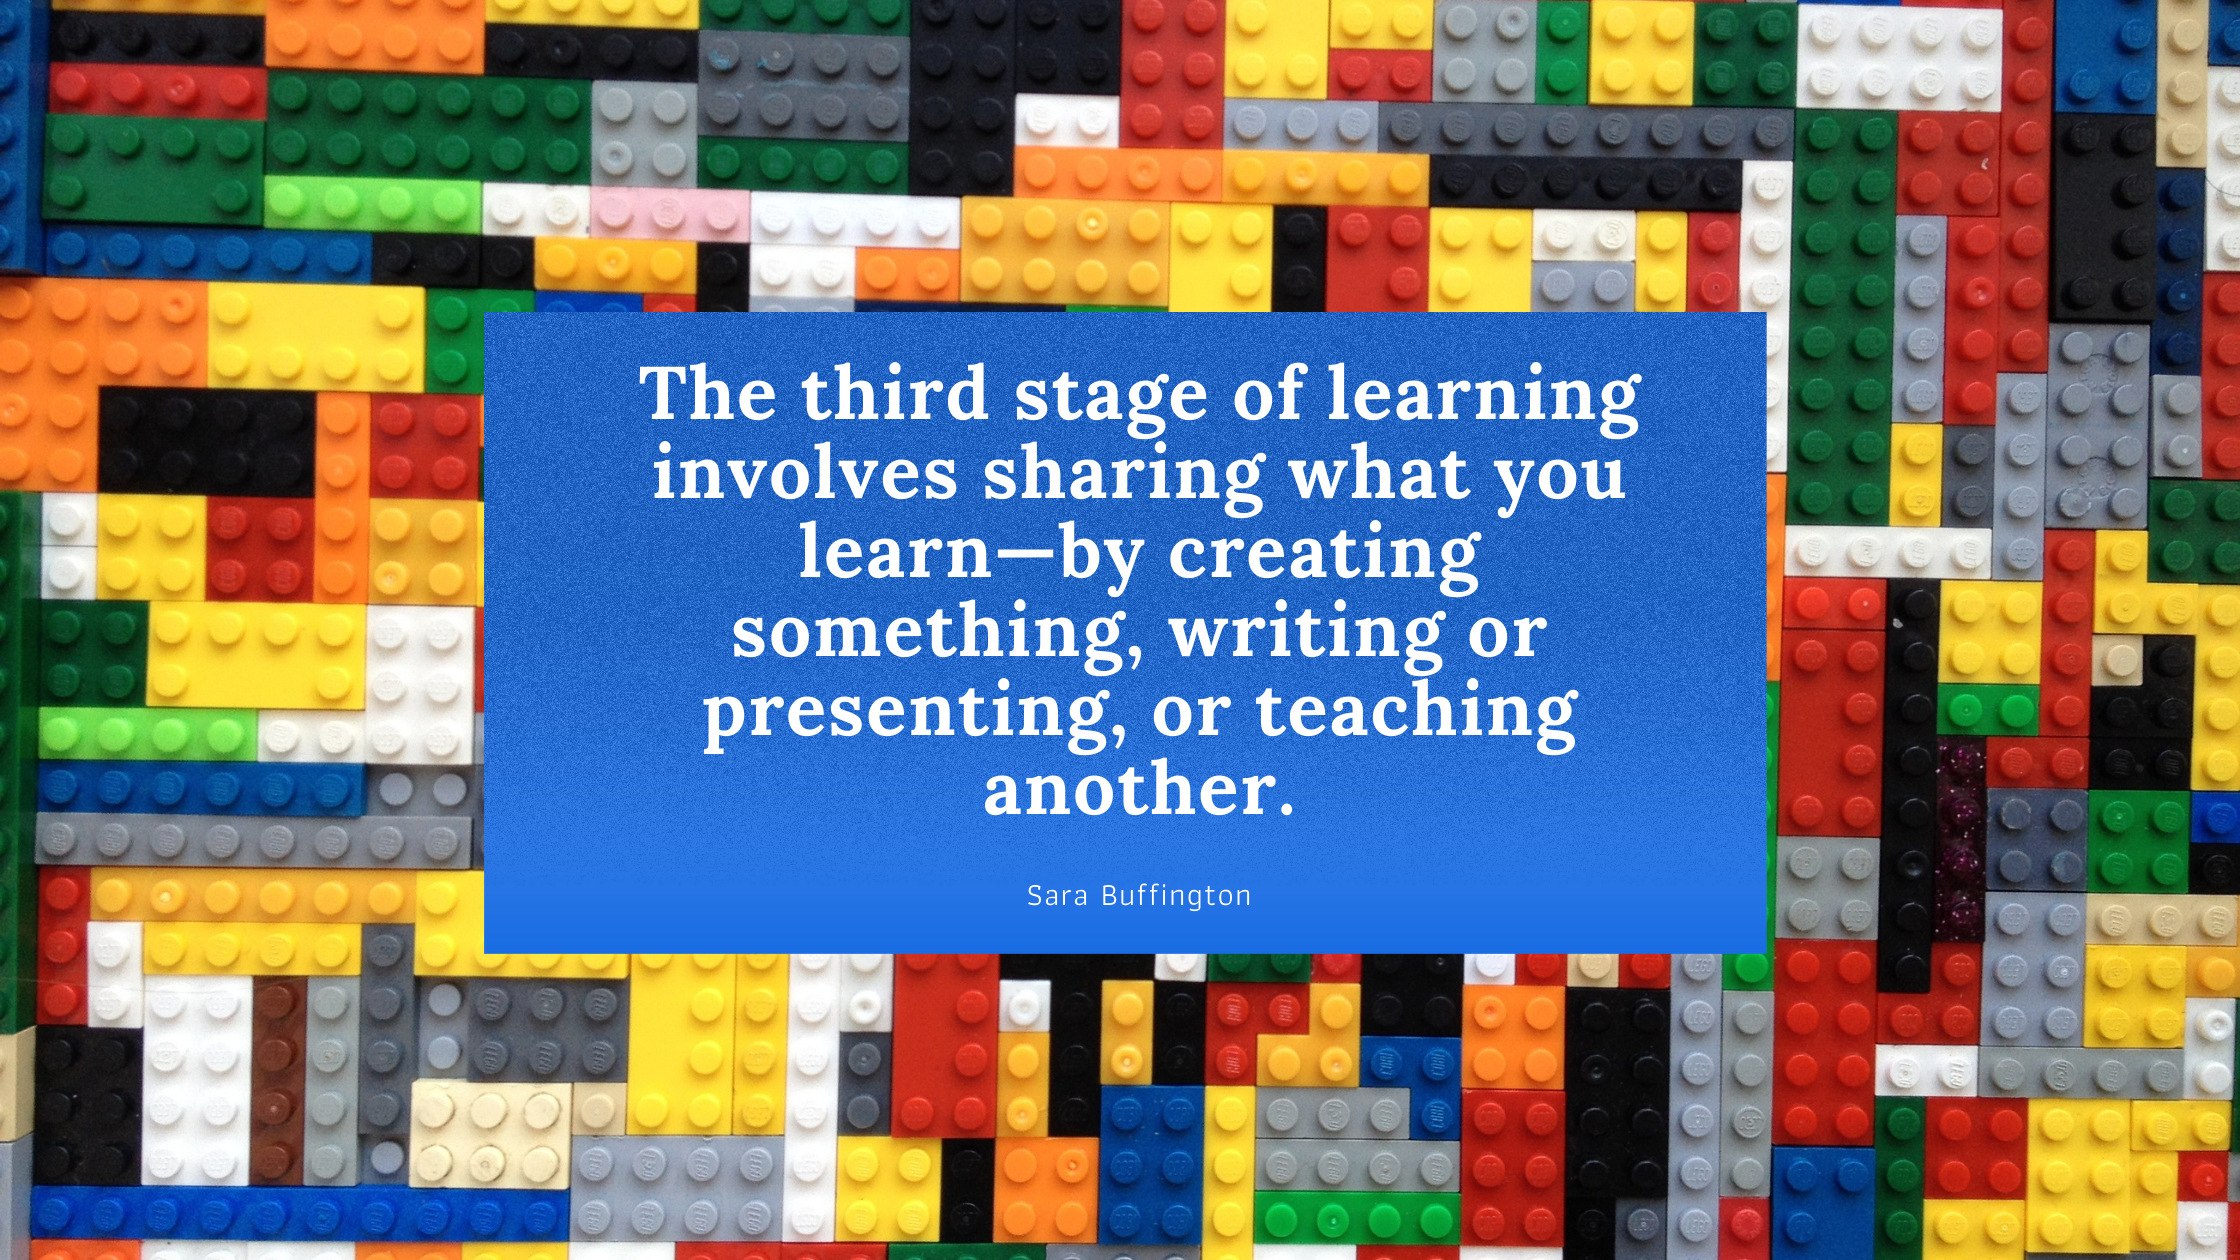 The third stage involves sharing what you learn—by creating something, writing or presenting, or teaching another.